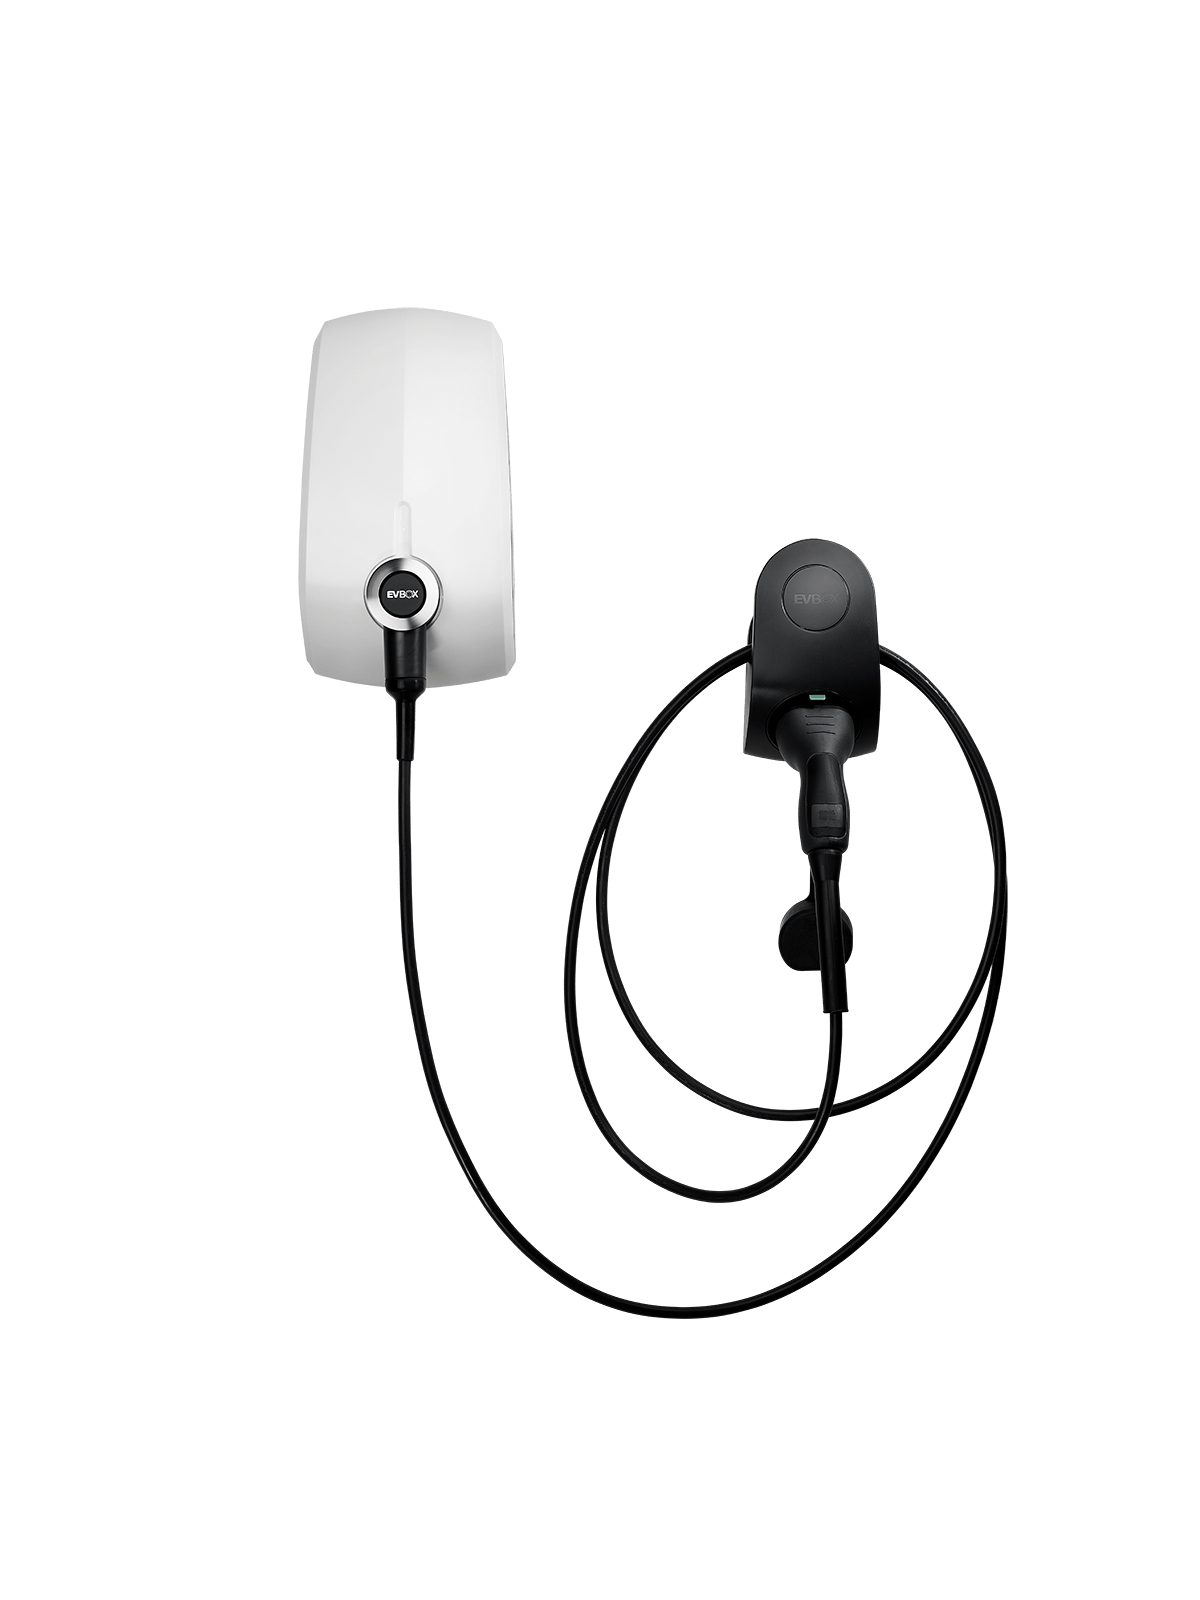 EVBox Elvi Tethered home electric car charger